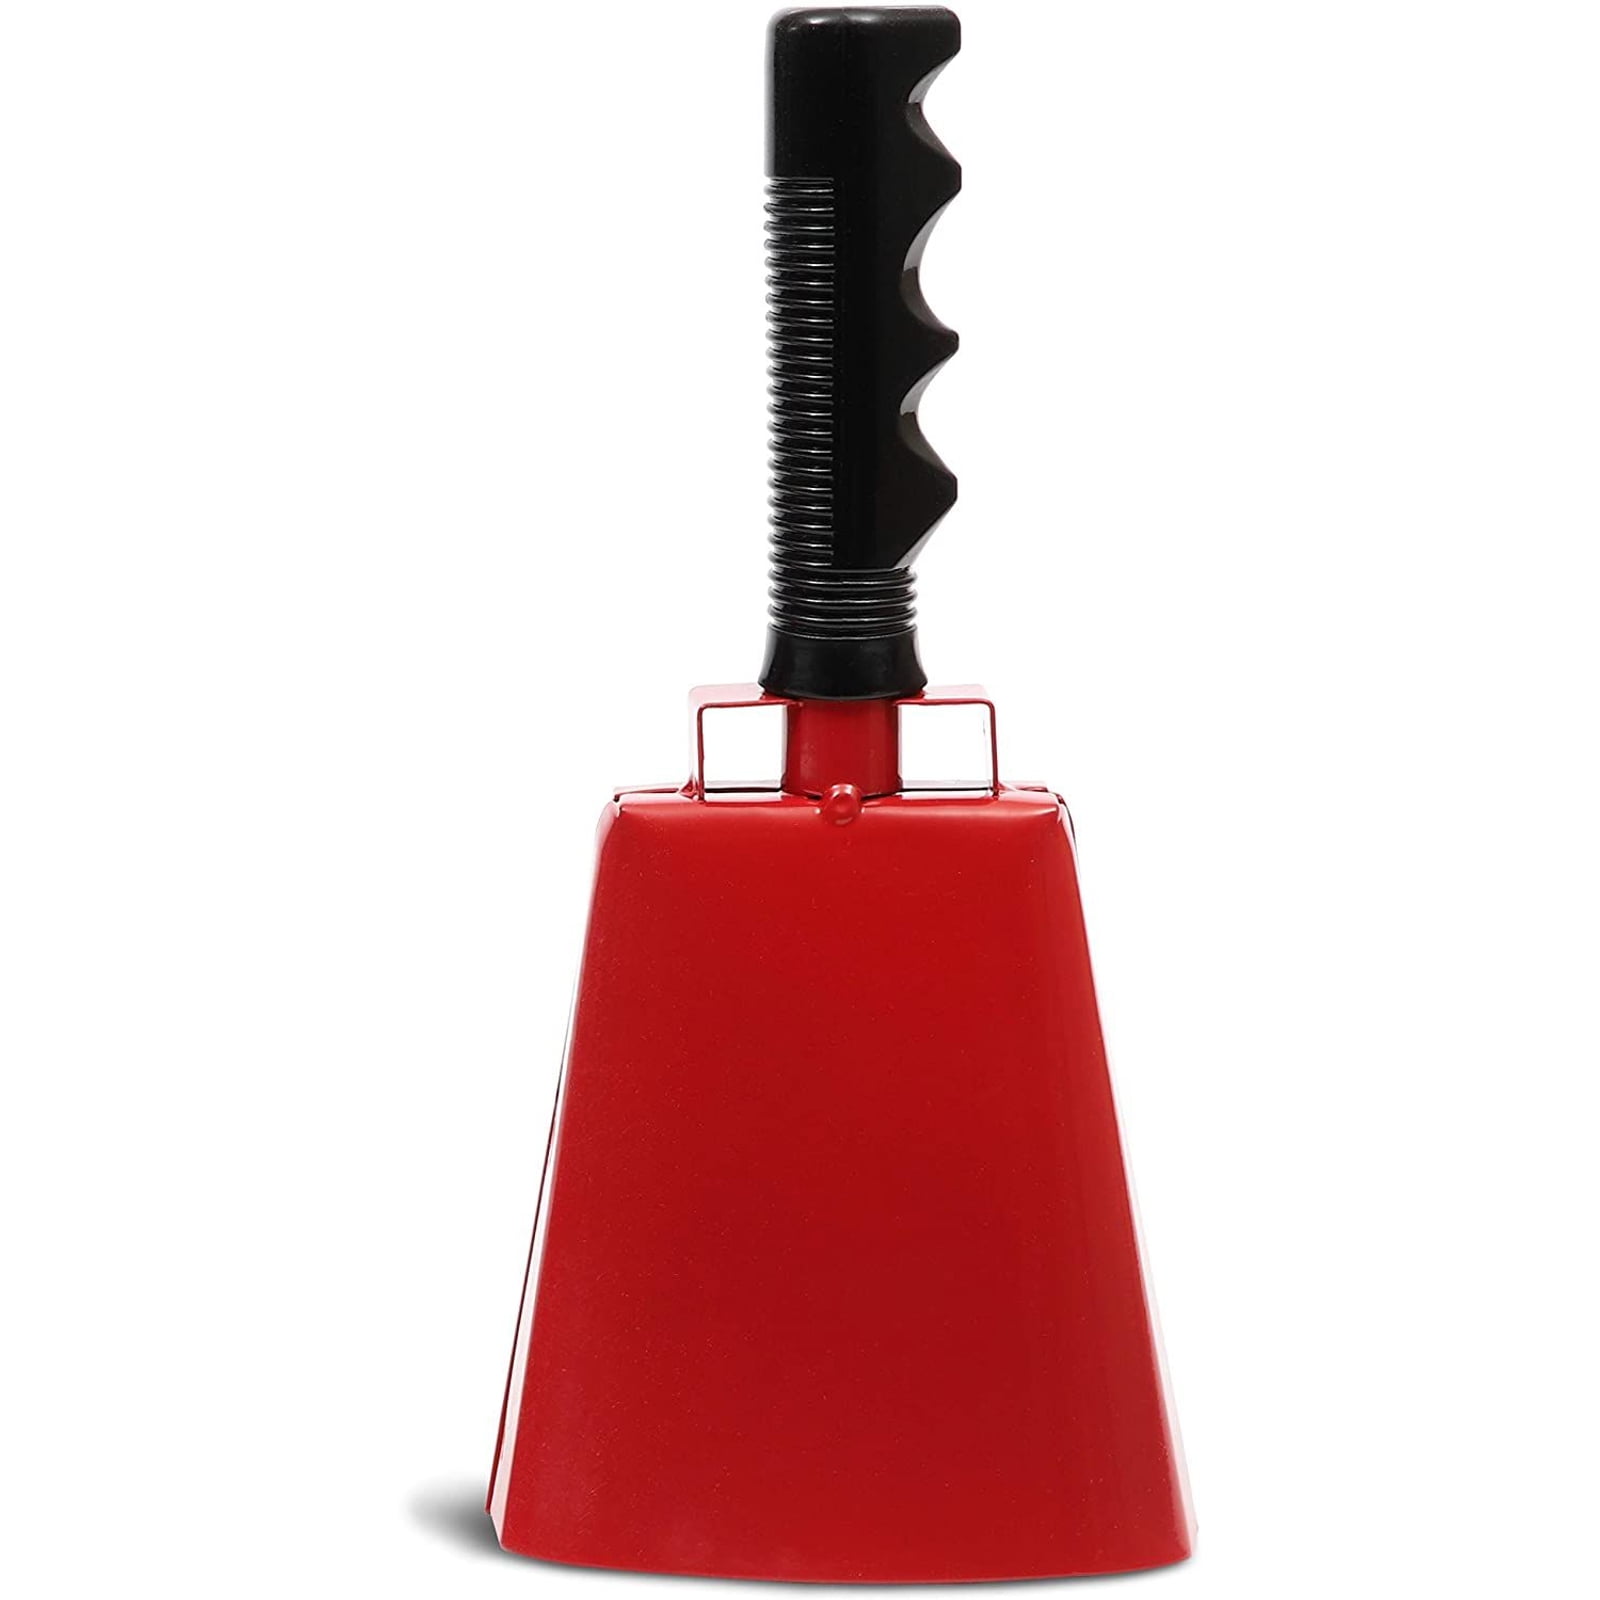 2-pack Cow Bell Noisemakers Loud Call Bells for Cheers for sale online Cowbell With Handle 